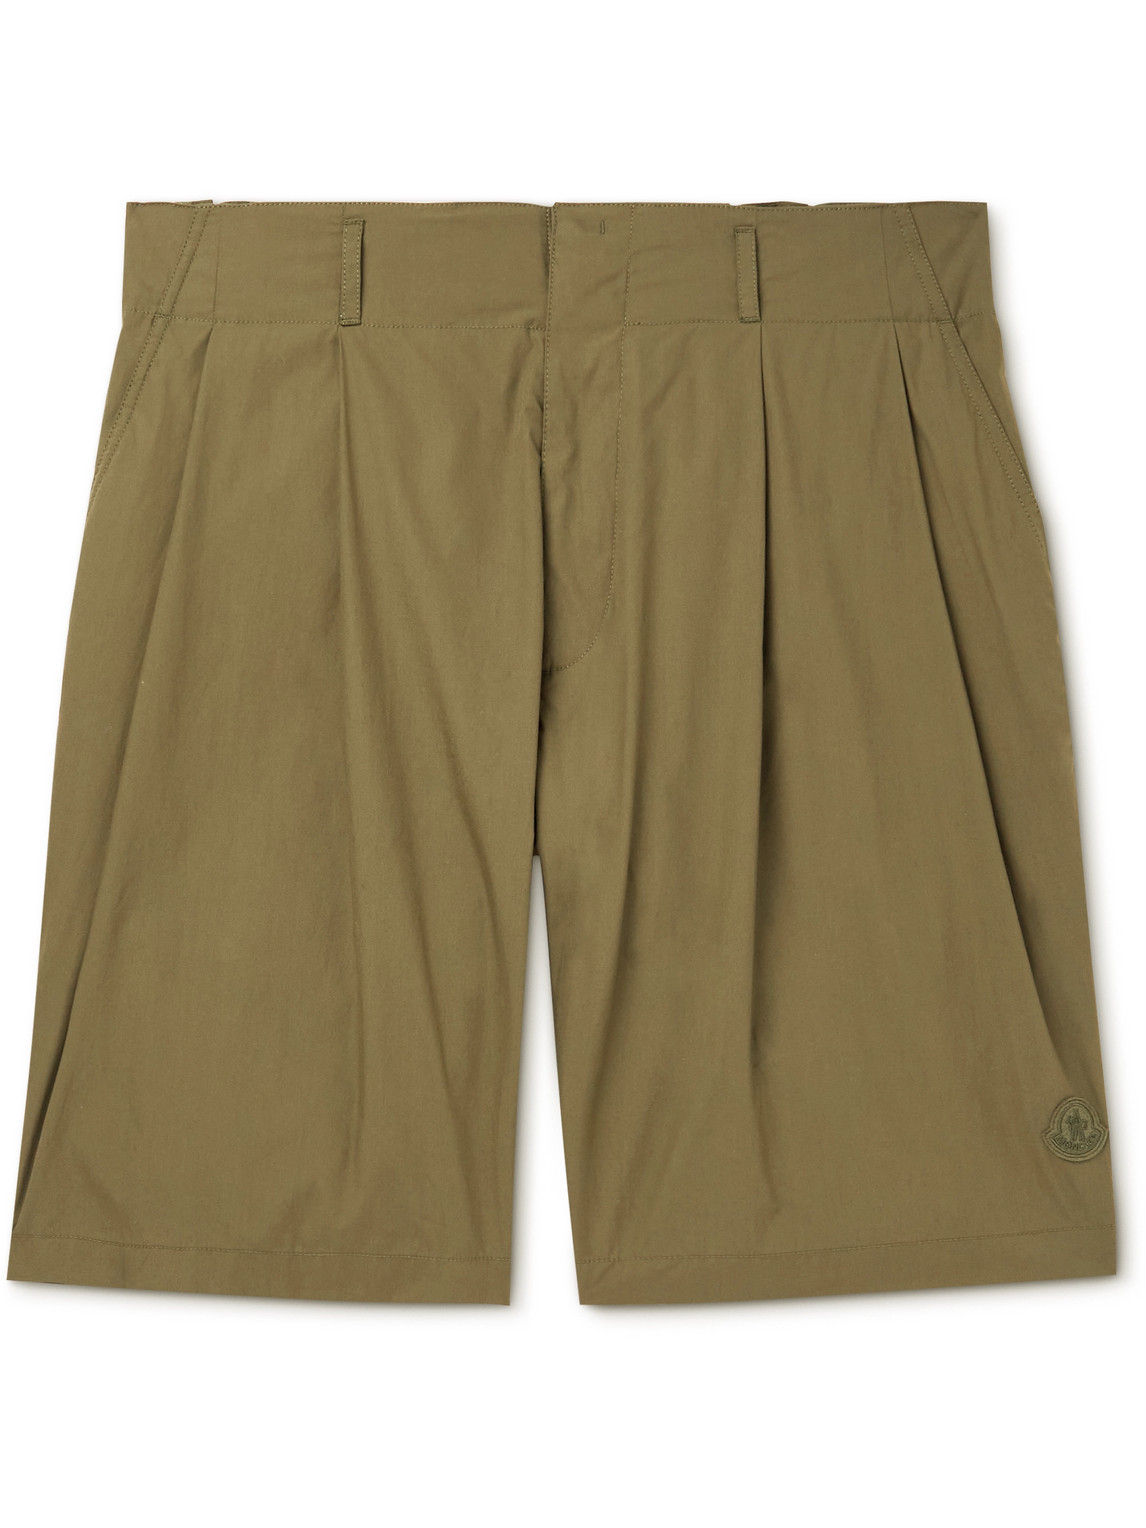 Moncler Genius 2 Moncler 1952 Straight-leg Pleated Cotton-poplin Shorts In Brown